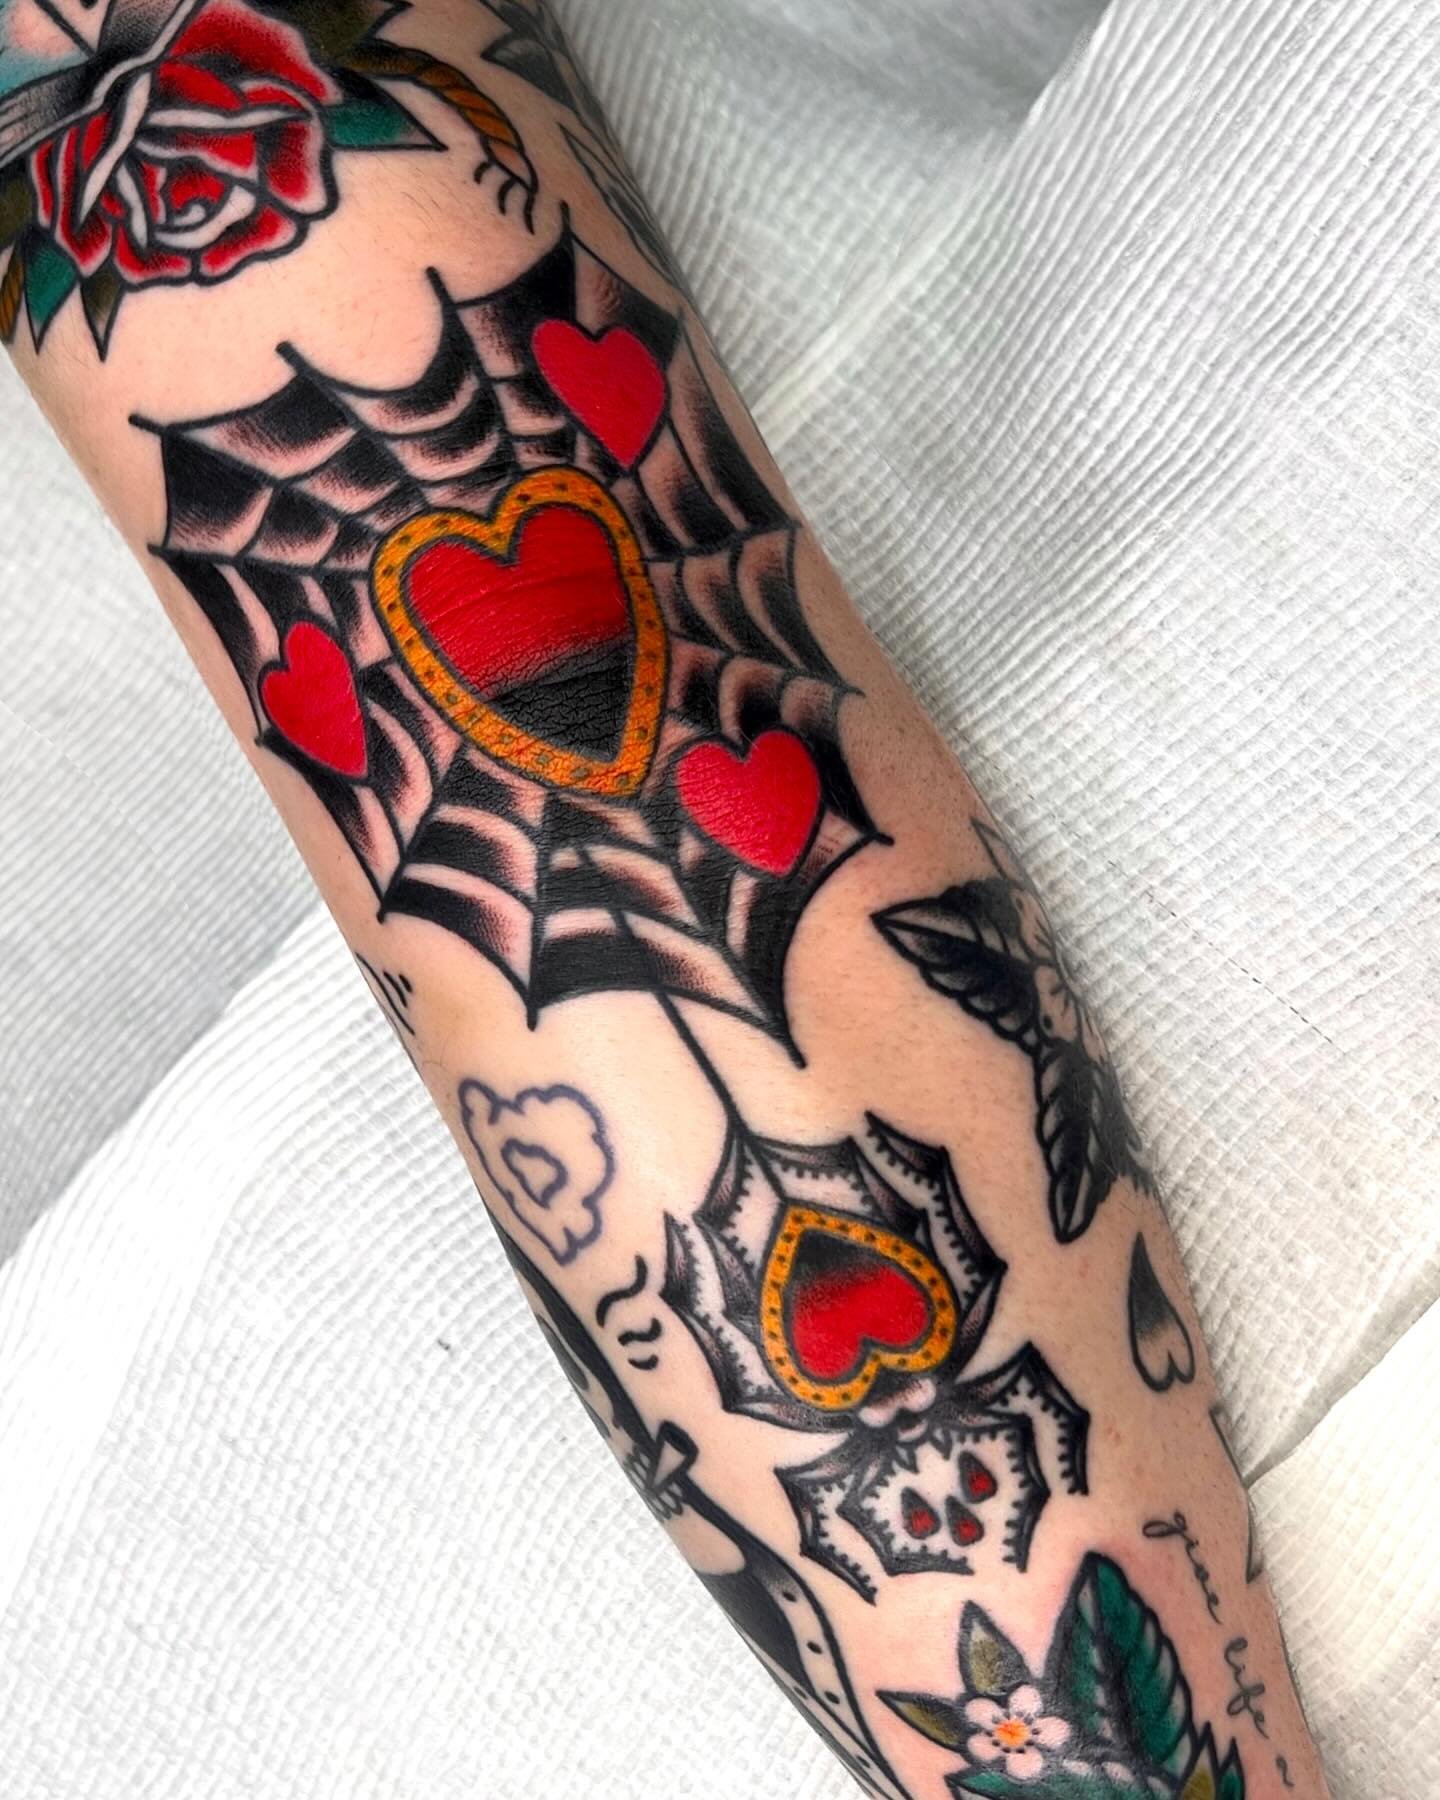 Spicy elbow web and more progress on @georgiasarah__ sleeve! This has been an absolute blast to work on and can&rsquo;t wait to show the finished product!
*Lines &amp; shading healed / colour fresh*
.
🌹made at @mans_ruin_tattoo 🌹
.
.
.
#tattoo&nbsp